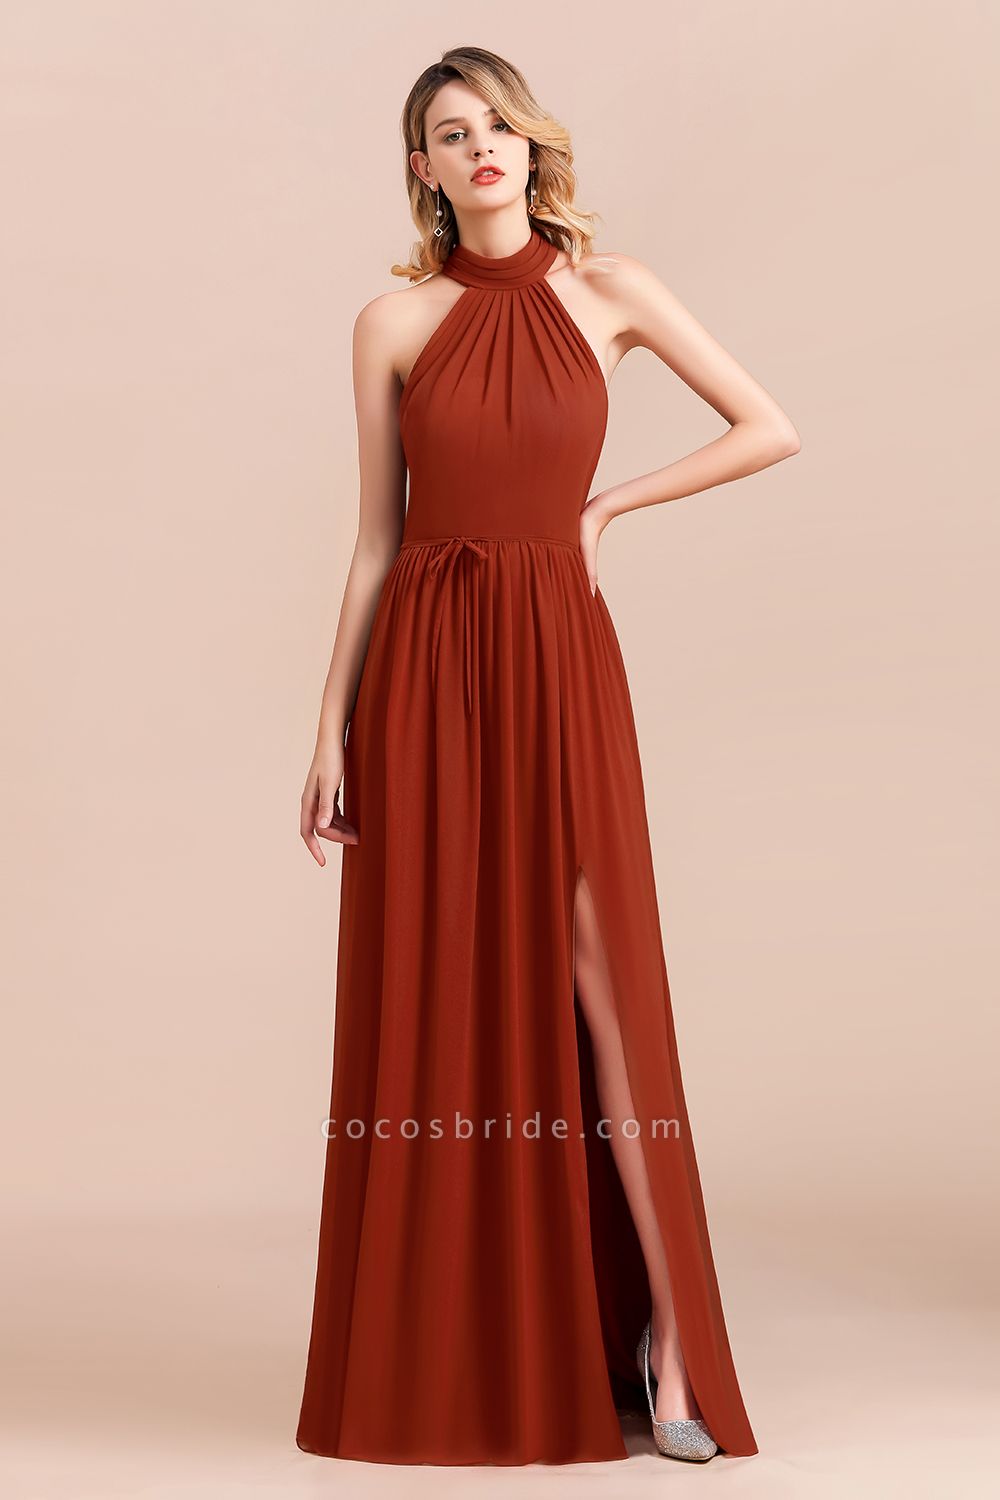 A-Line Halter Chiffon Floor-length Ruched Bridesmaid Dress With Side Slit